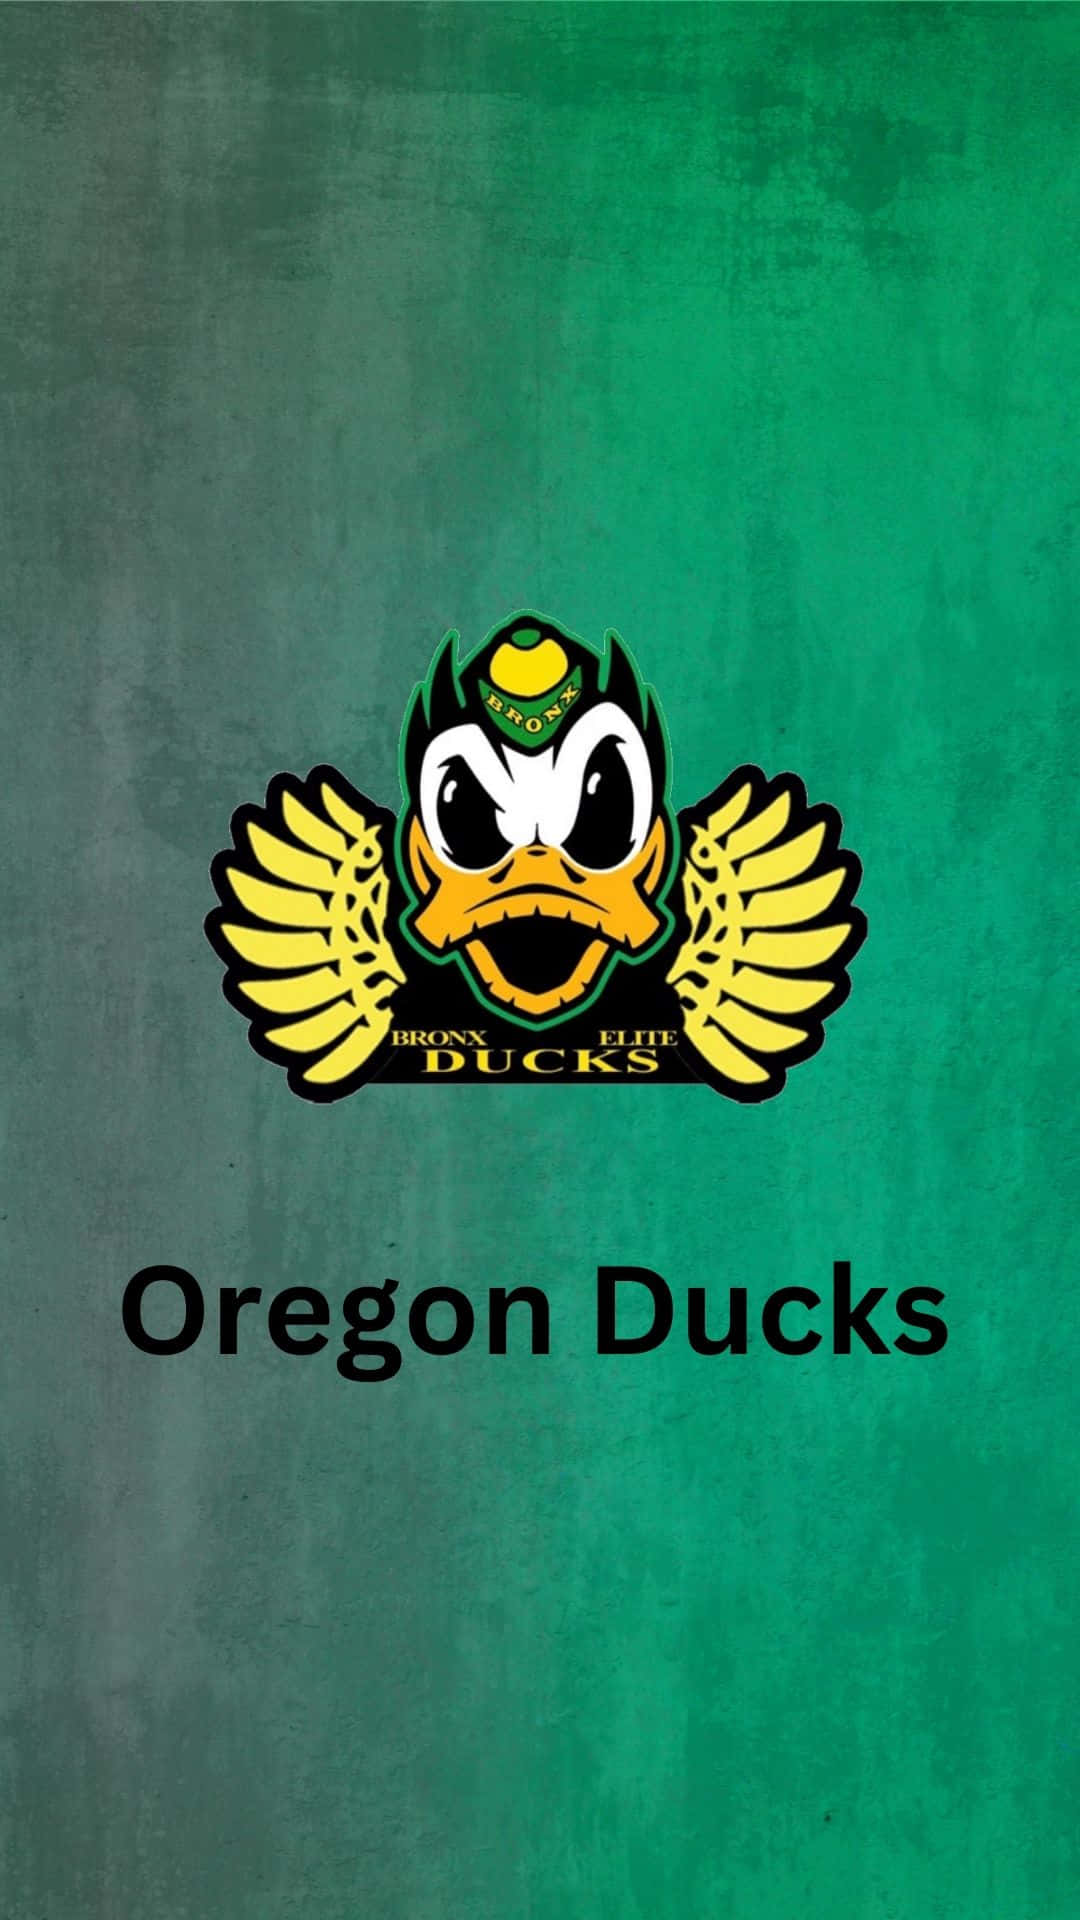 Exciting Oregon Ducks Football Game Moment